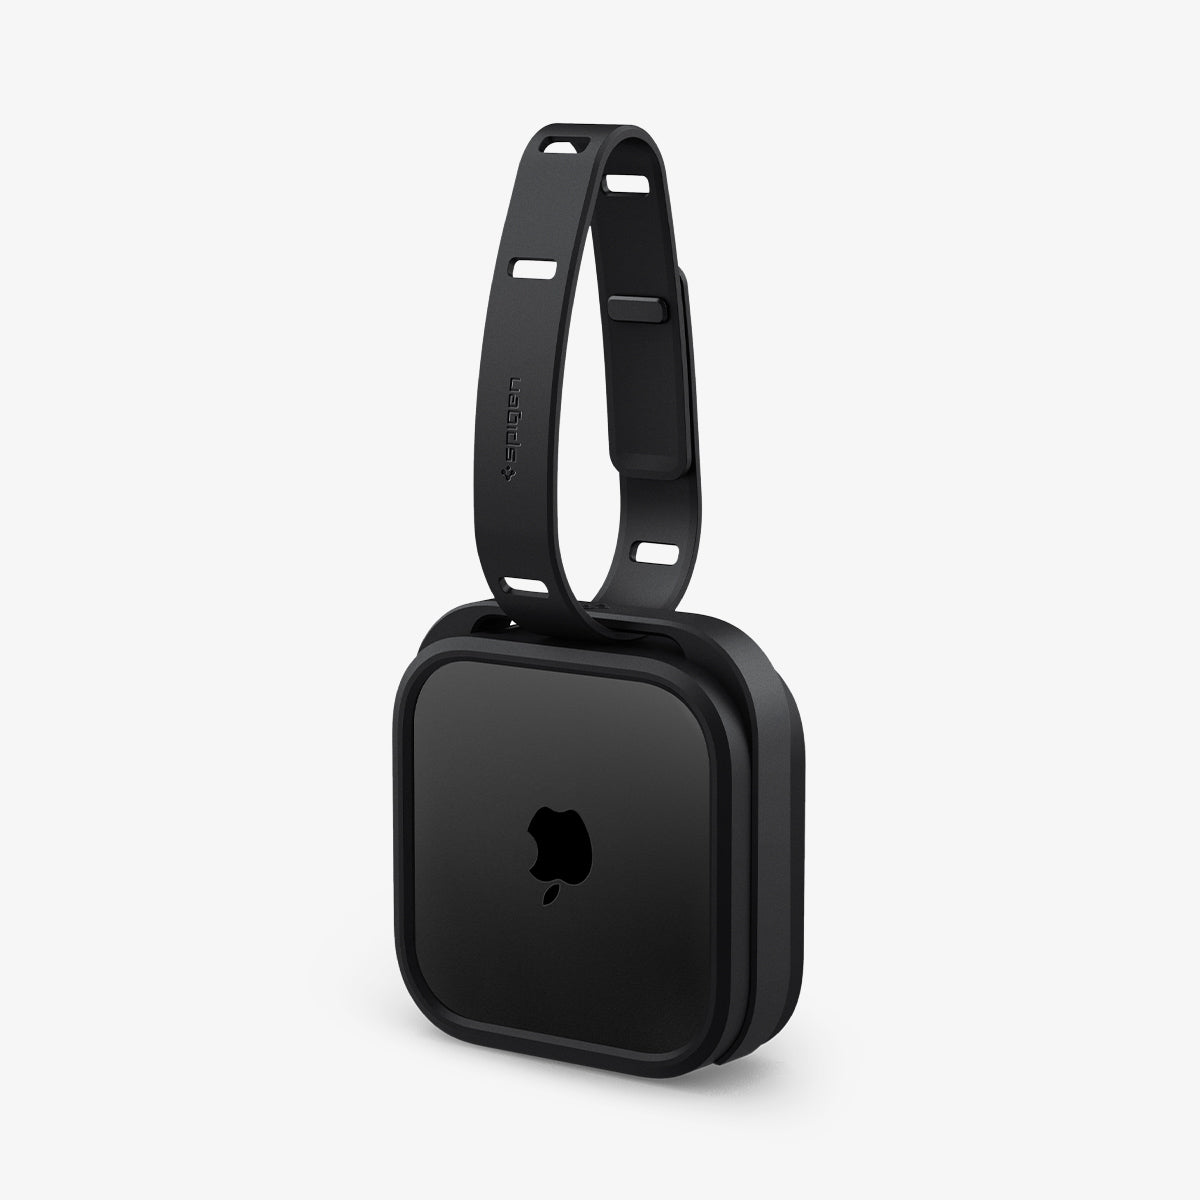 AMP05858 - Apple TV 4K (3rd Gen) Mount Silicone Fit in black showing the front and side with strap